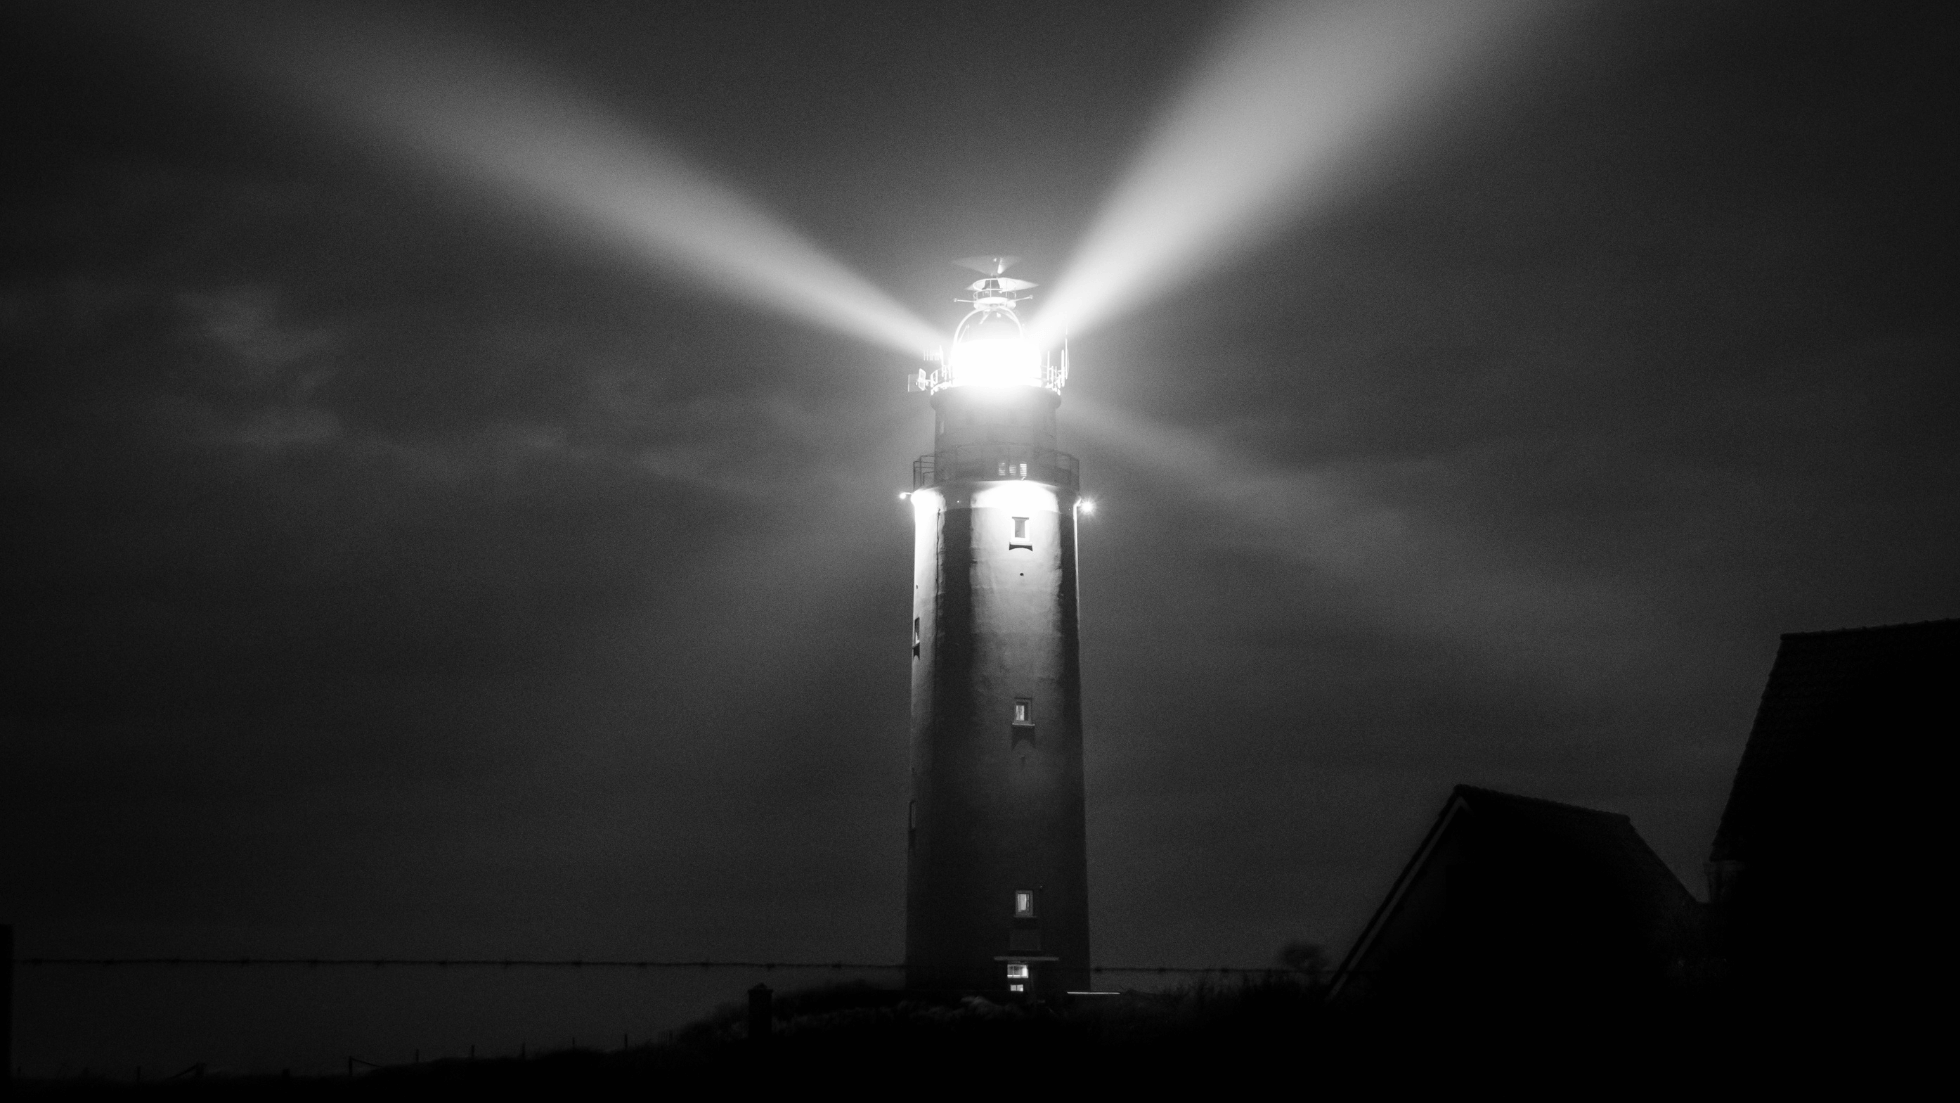 Shows a lighthouse at night